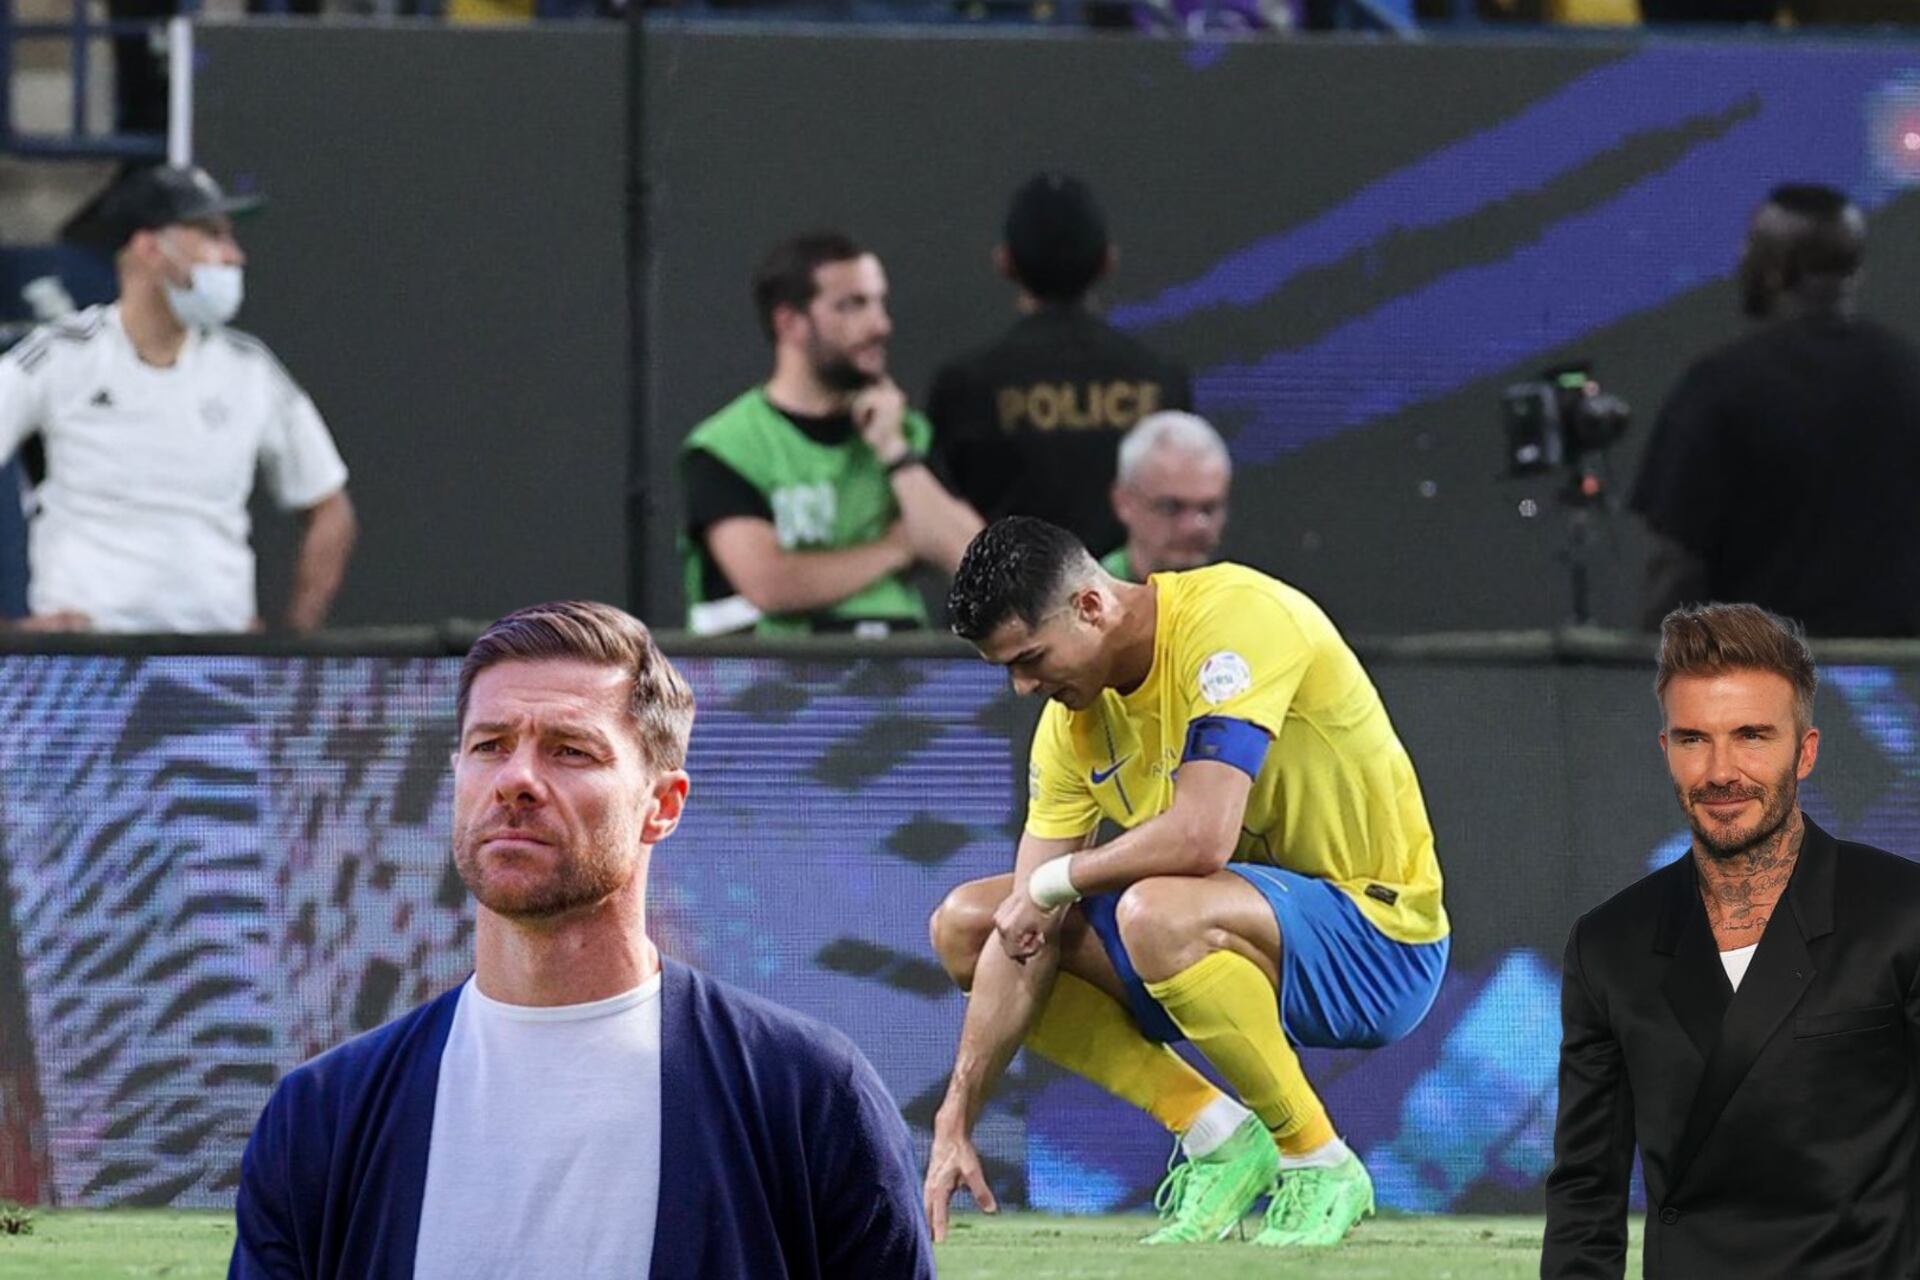 They angered Cristiano again & this was his reaction after the last game, Xabi Alonso and Beckham aware of the situation